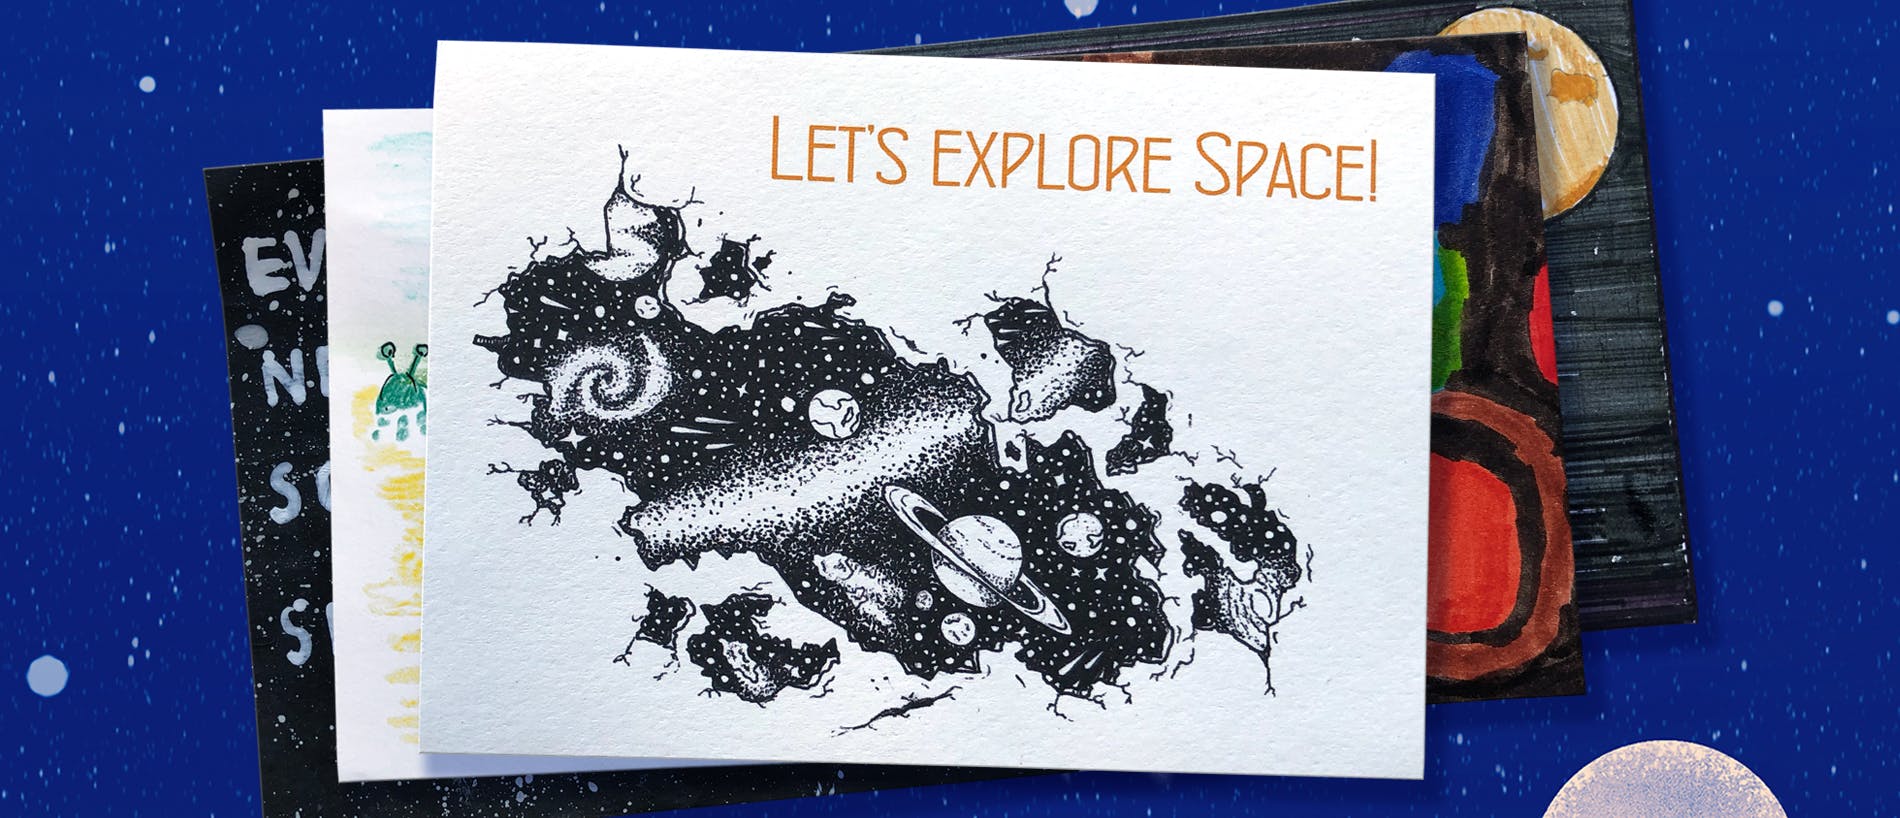 Sample postcard with a drawing of planets in space